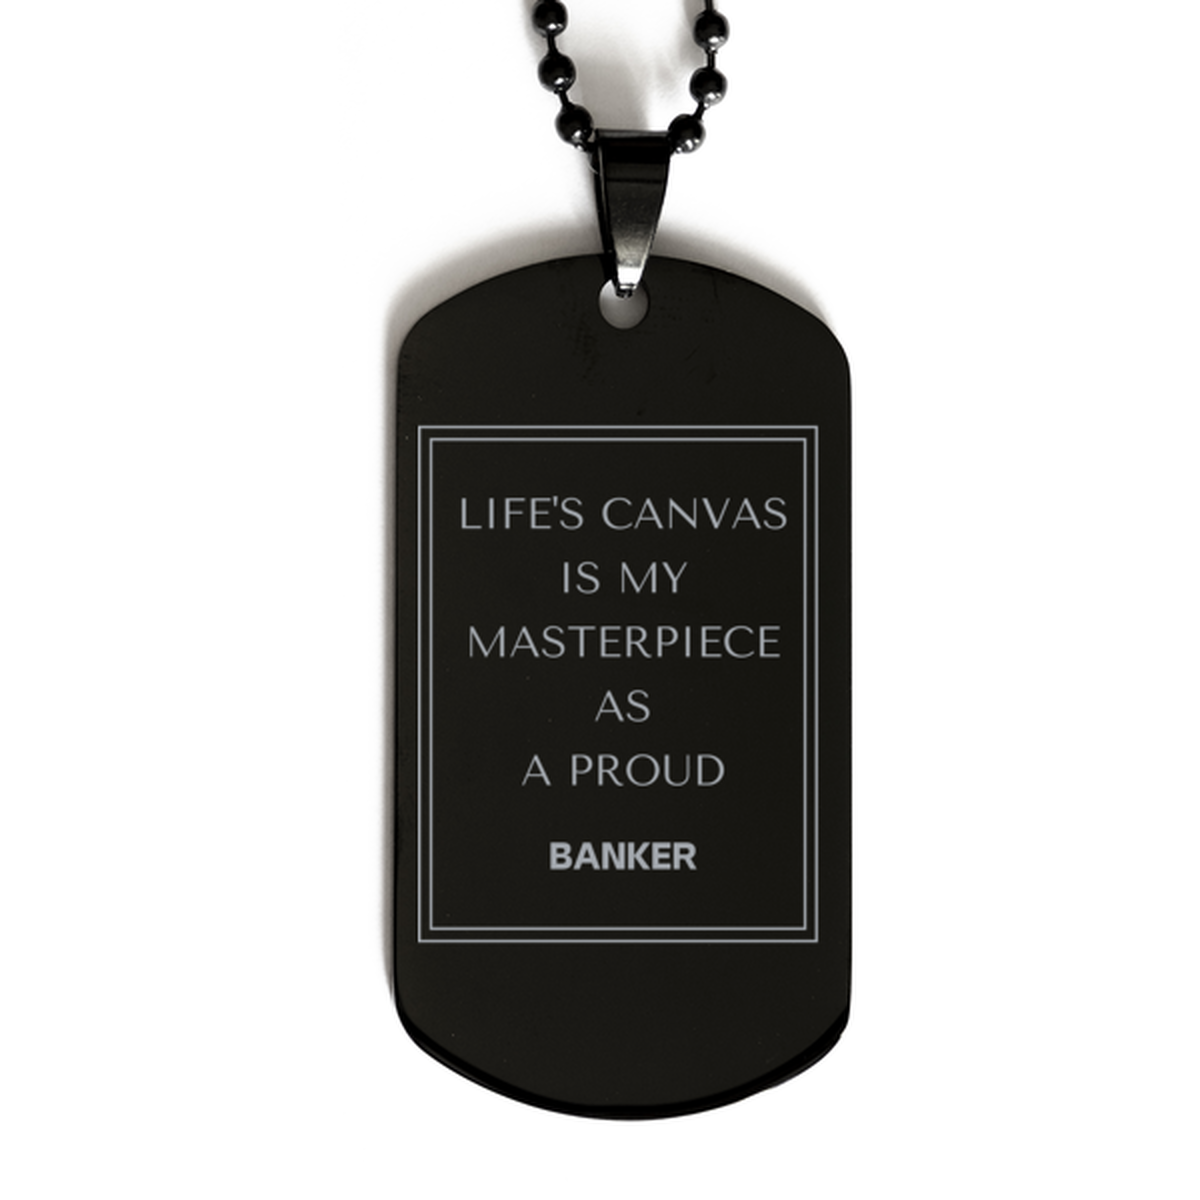 Proud Banker Gifts, Life's canvas is my masterpiece, Epic Birthday Christmas Unique Black Dog Tag For Banker, Coworkers, Men, Women, Friends